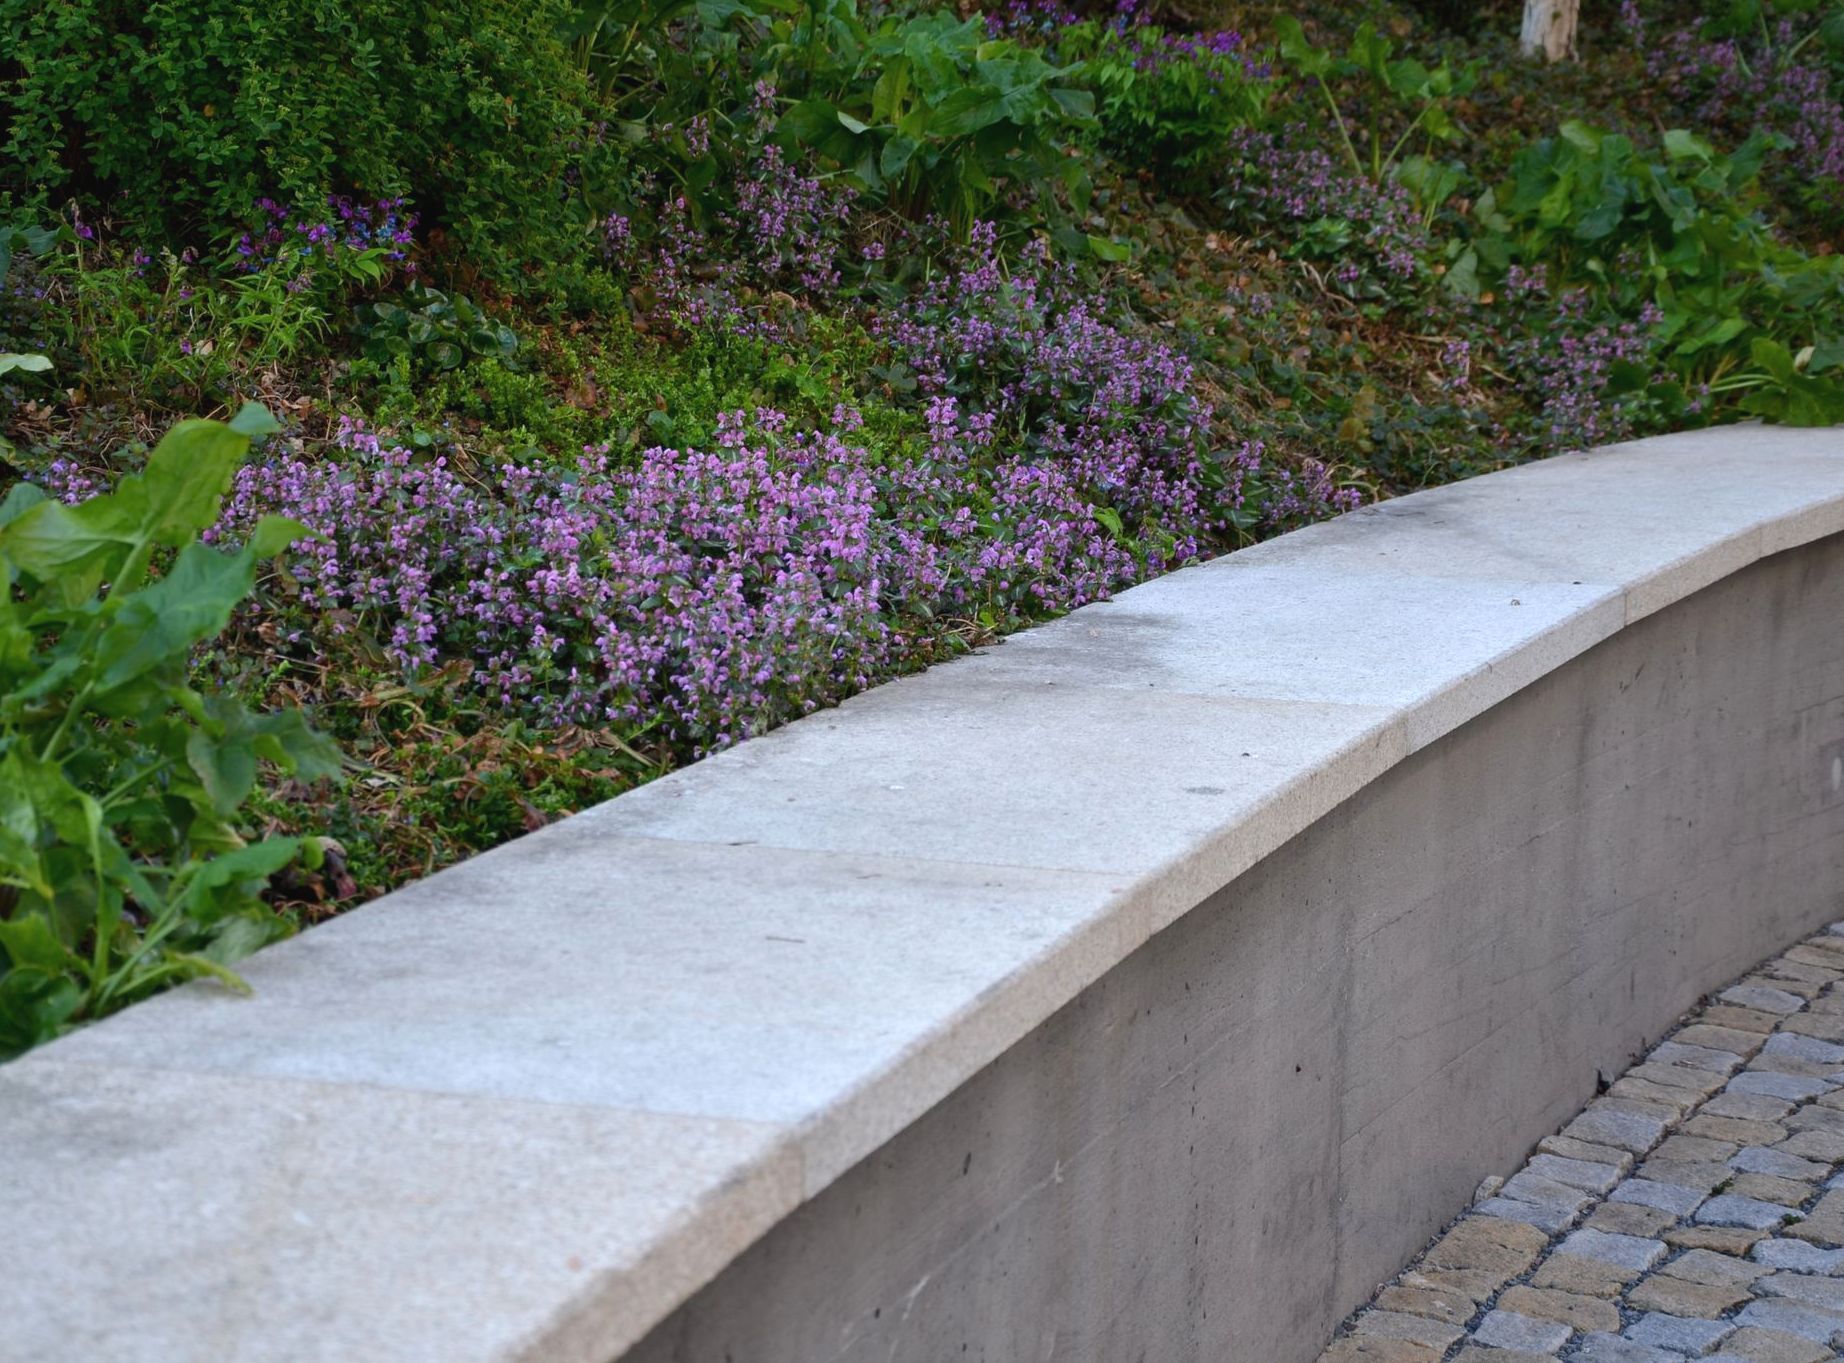 A concrete wall with purple flowers in the background